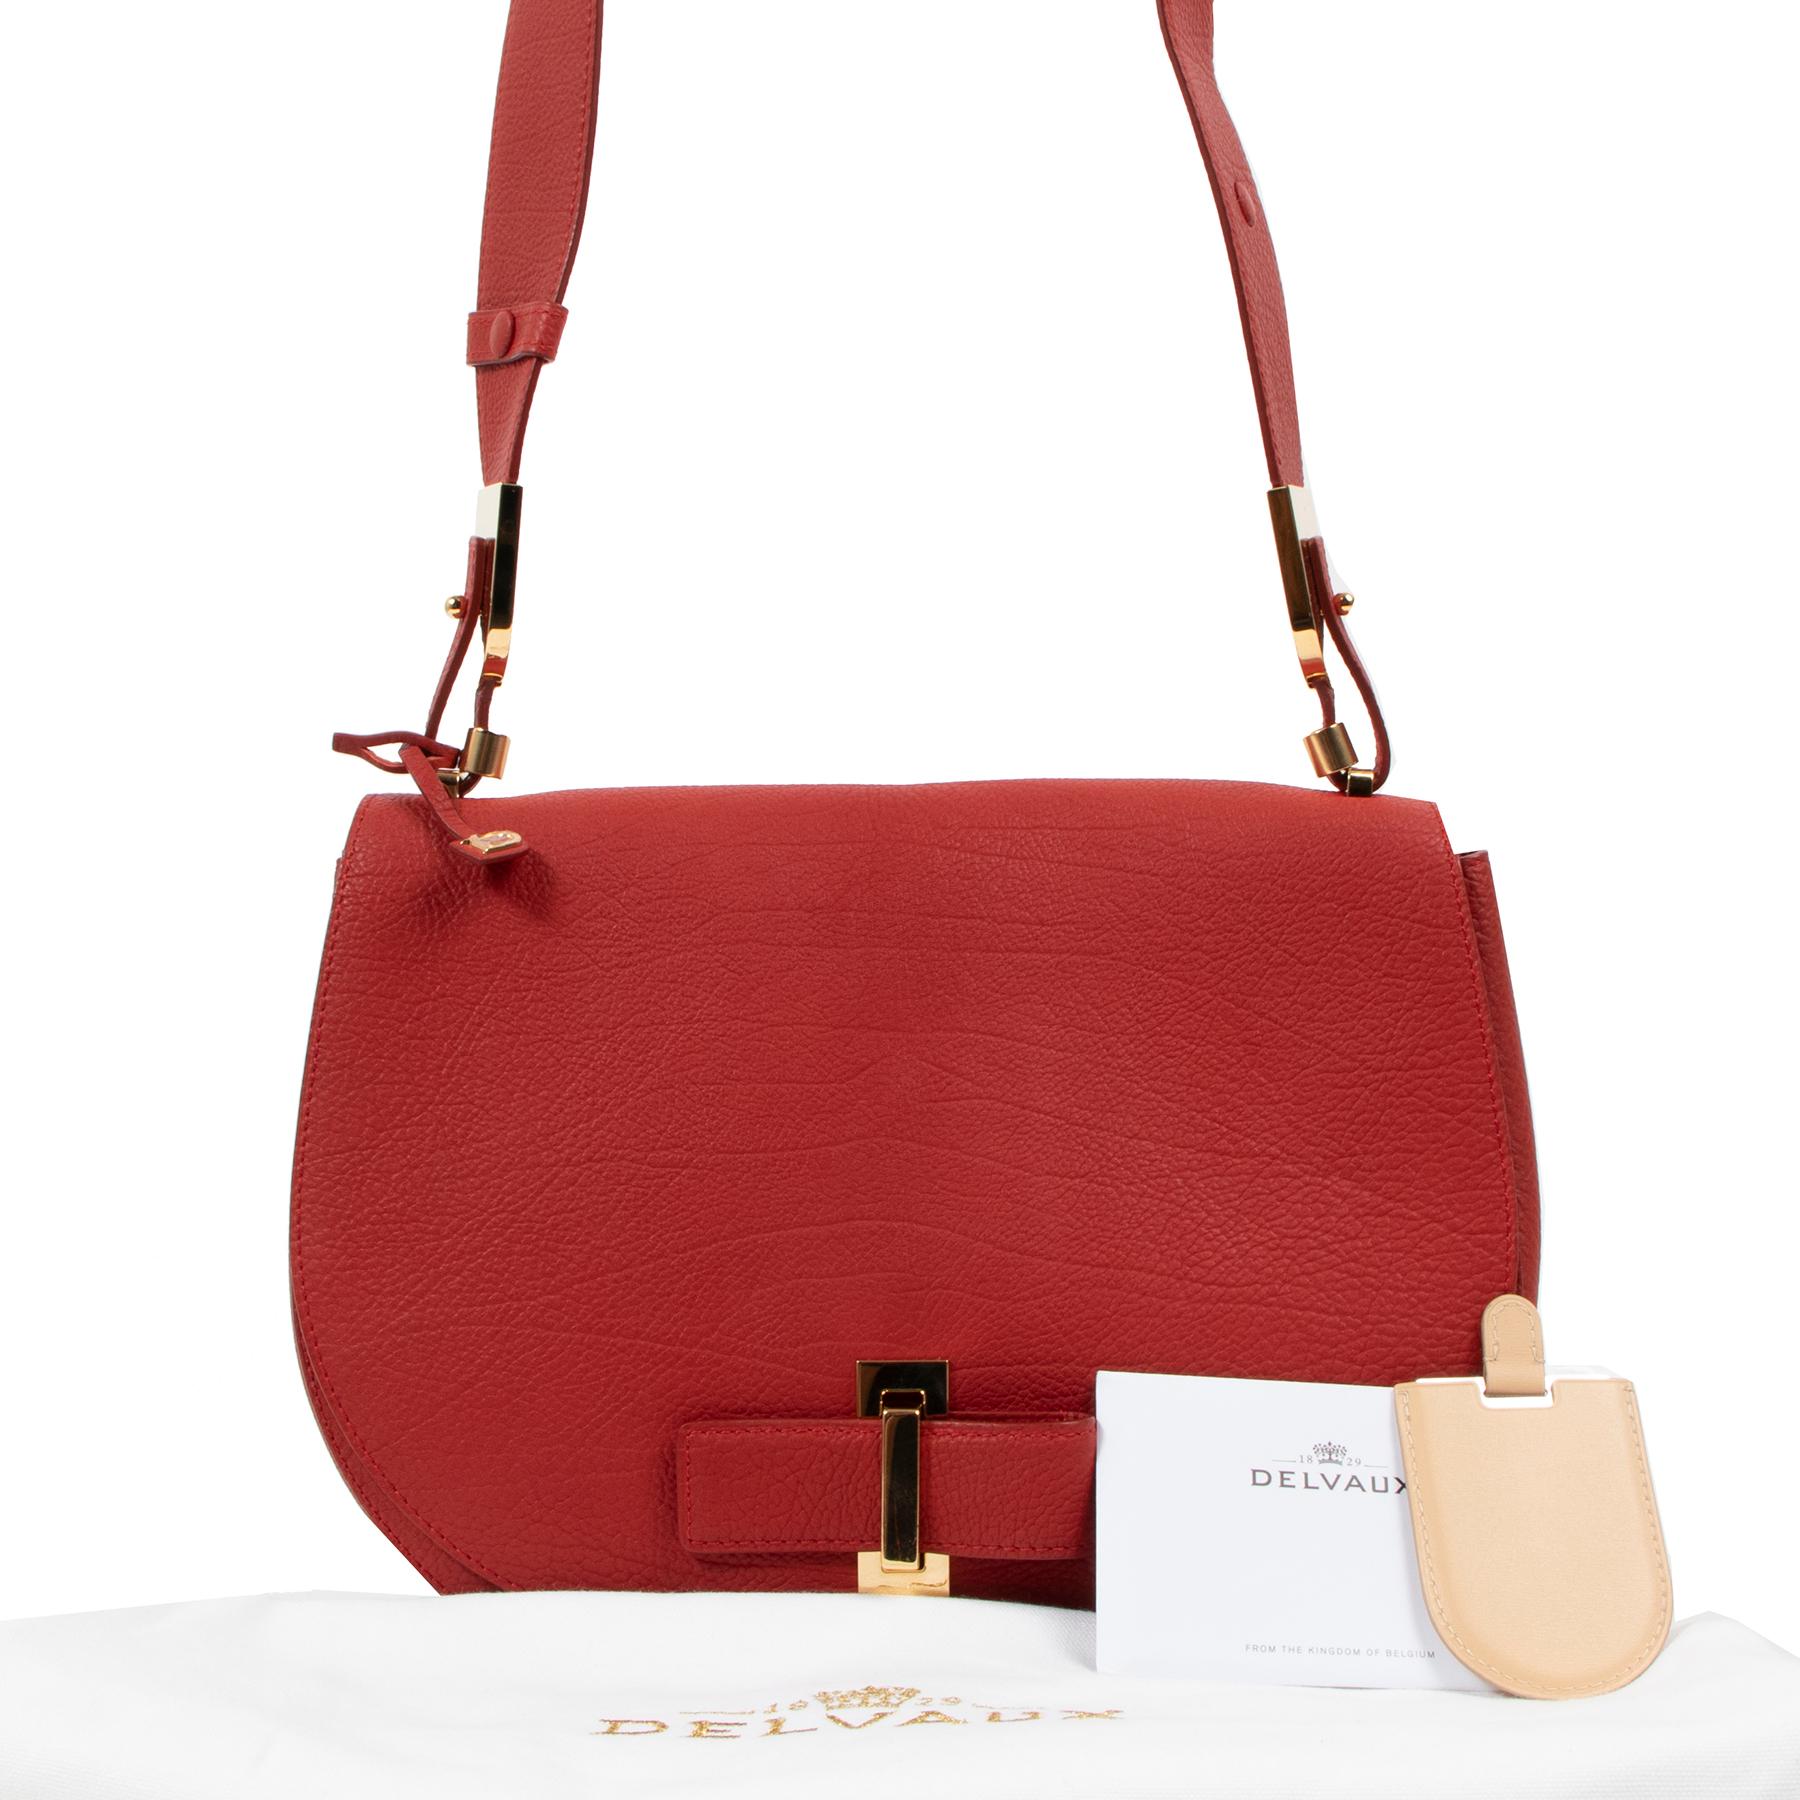 Delvaux Le Mutin MM Shine Scarlet Red Crispy Calf

Delvaux' take on the timeless saddle bag design. This Delvaux Le Mutin crossbody bag has a distinctive curvy shape. Crafted from heavy-grained Crispy Calf leather, it's crispy and supple to the